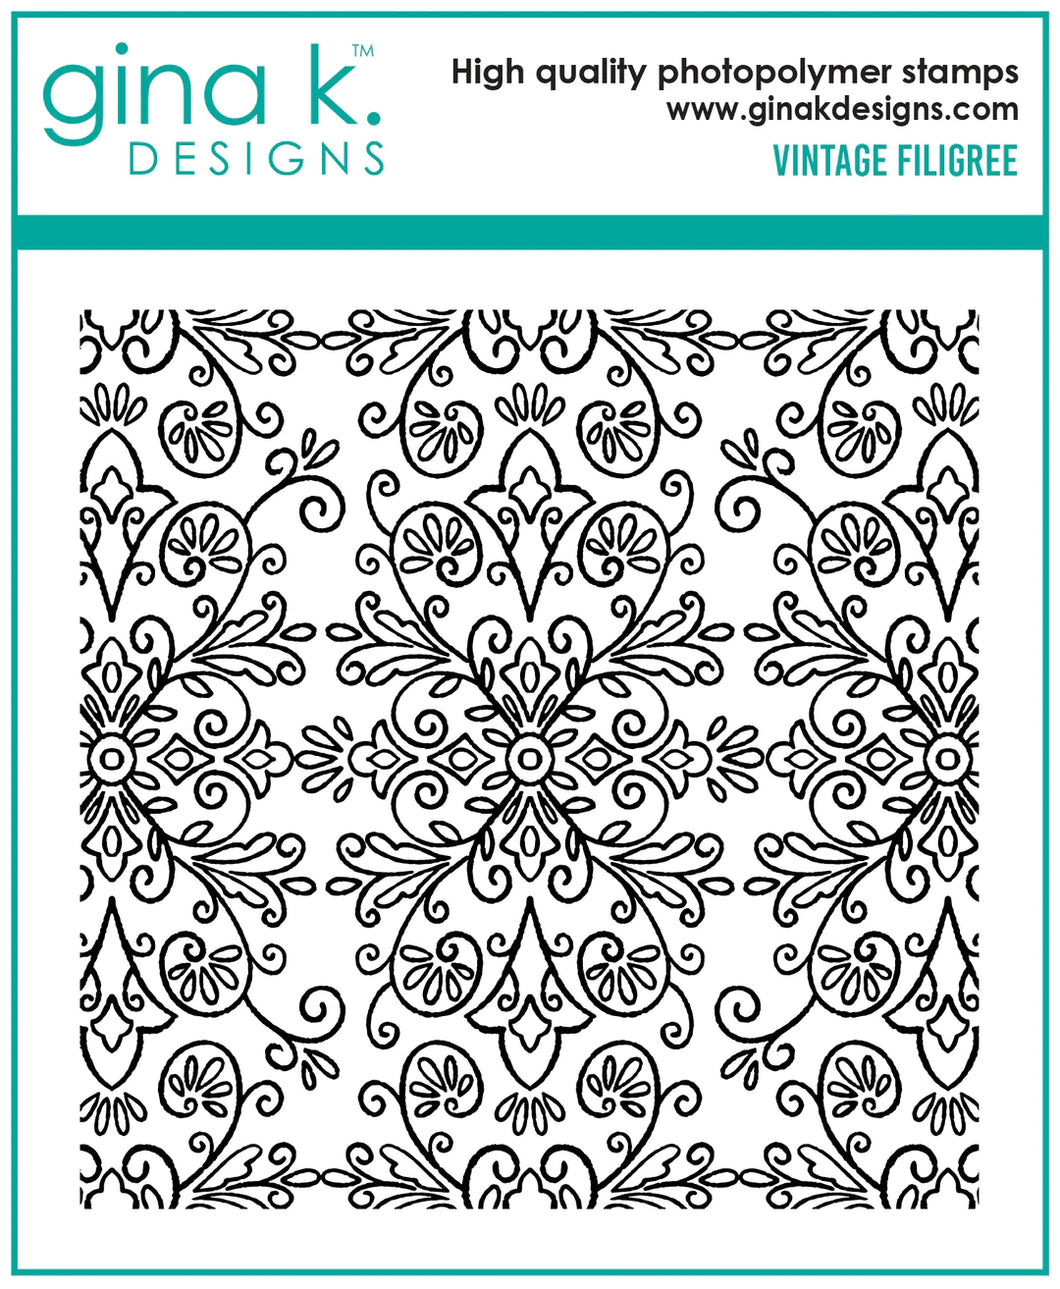 Gina K. Designs - Background Stamp - Vintage Filigree. Vintage Filigree is a stamp set by Arjita Singh. This set is made of premium clear photopolymer and measures 6